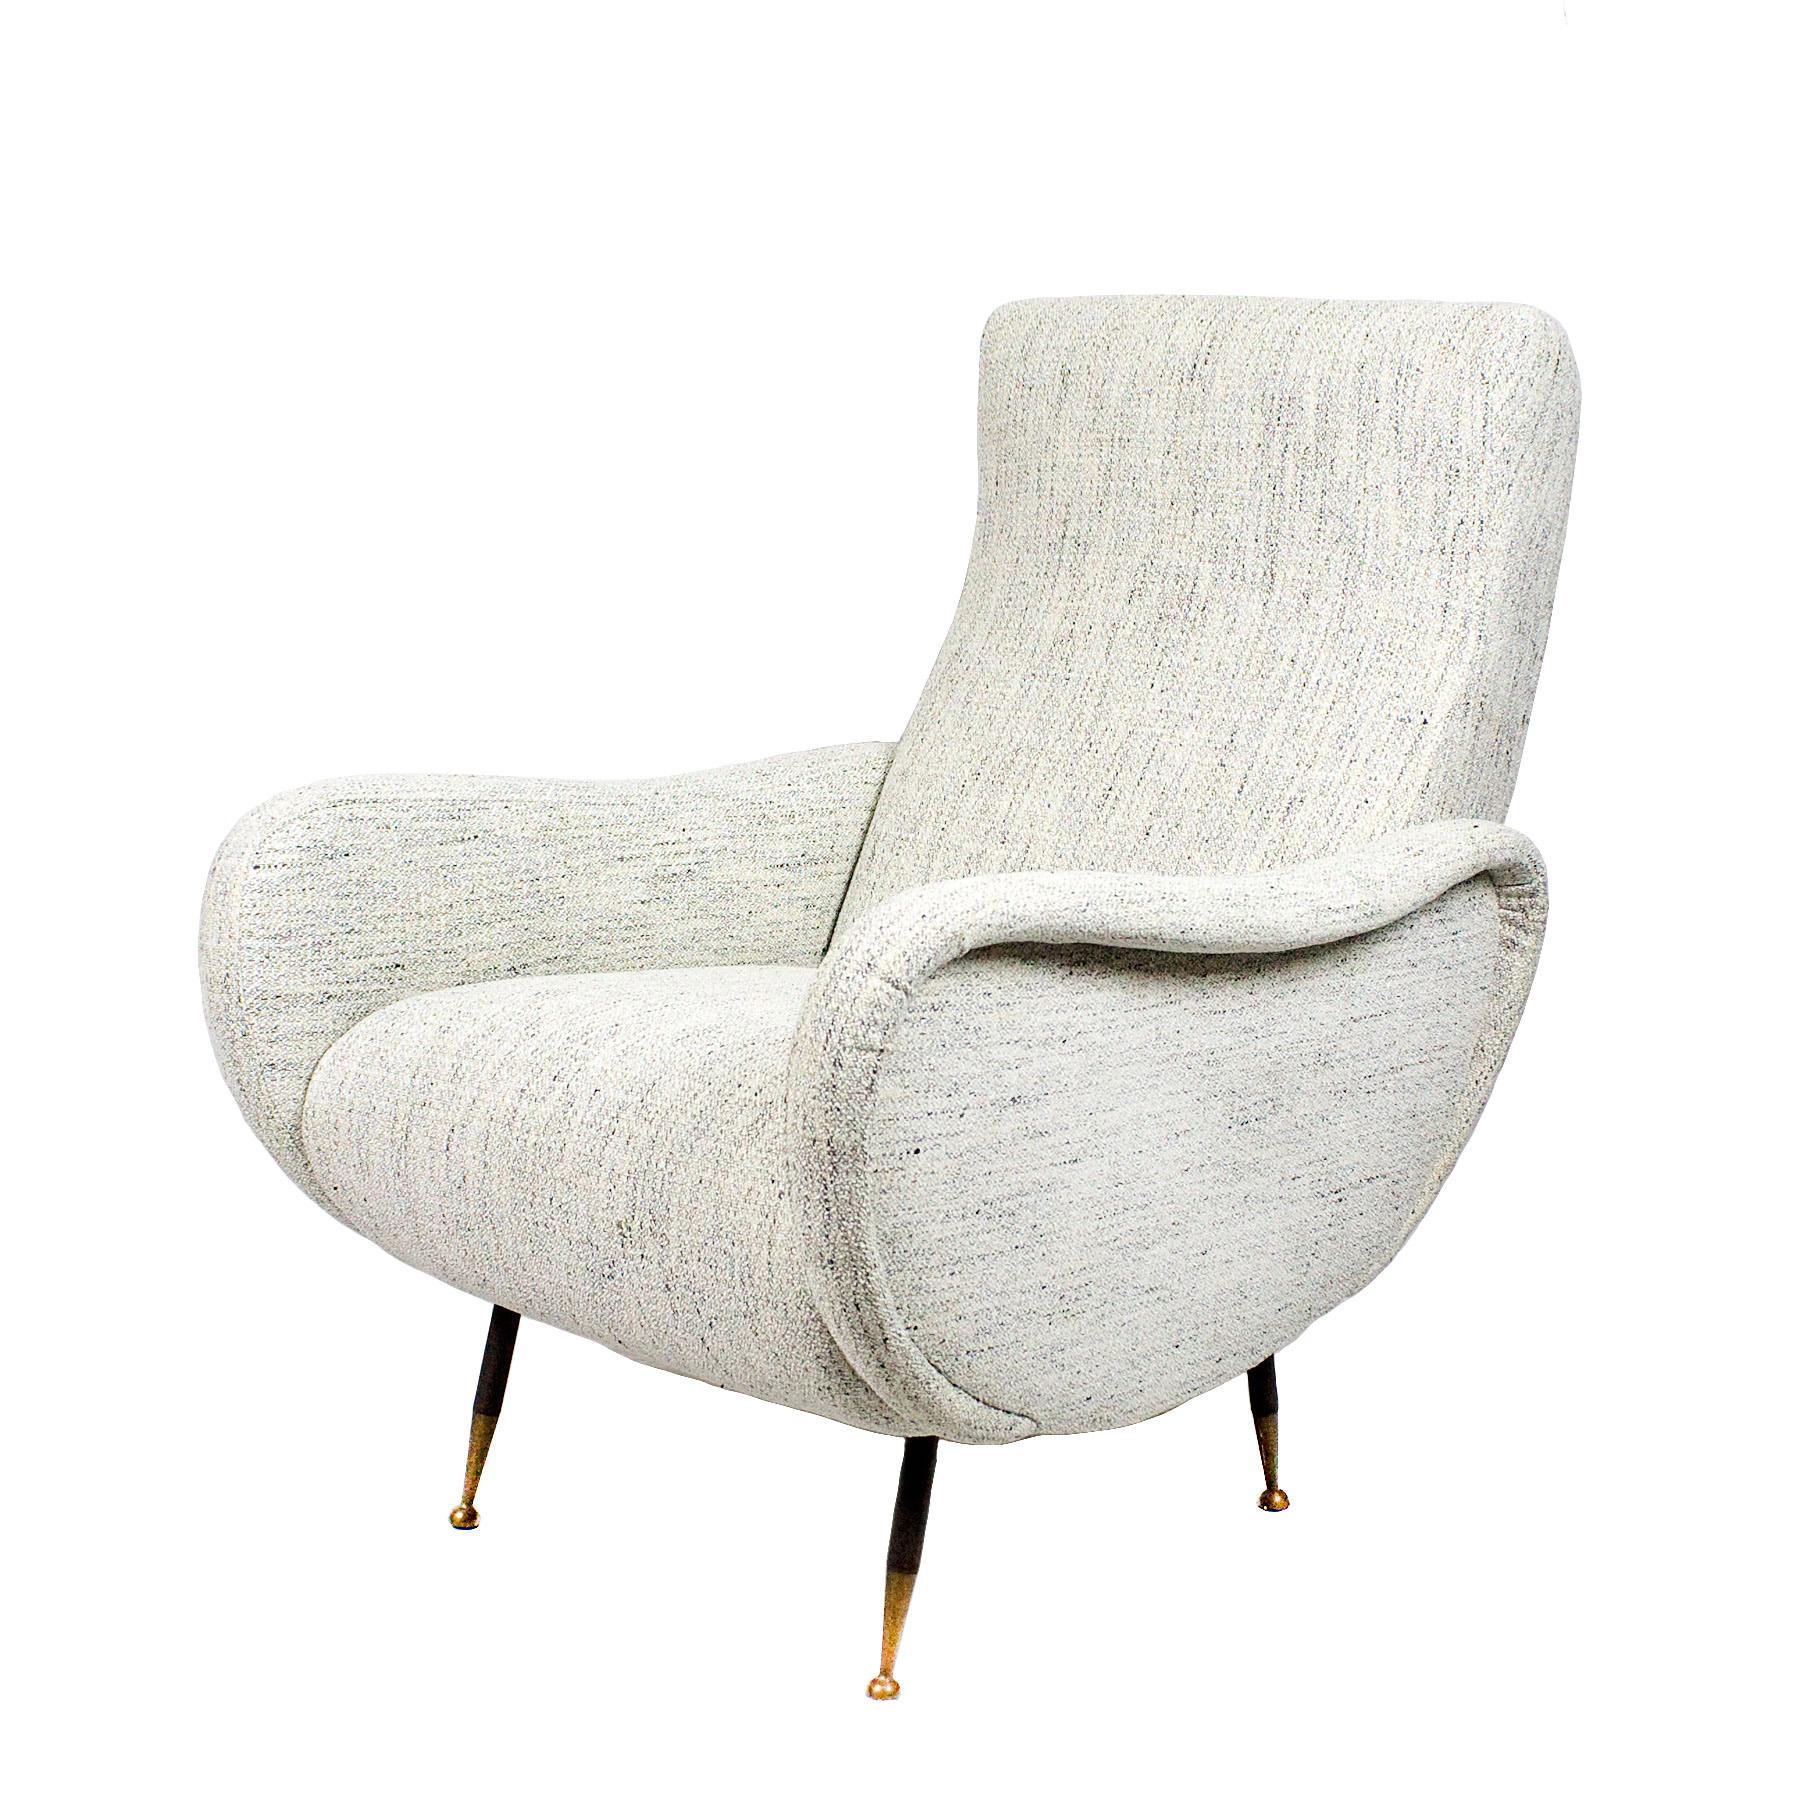 Italian Pair of Mid-Century Modern Armchairs, Steel and Brass, Flecked Fabric - Italy For Sale